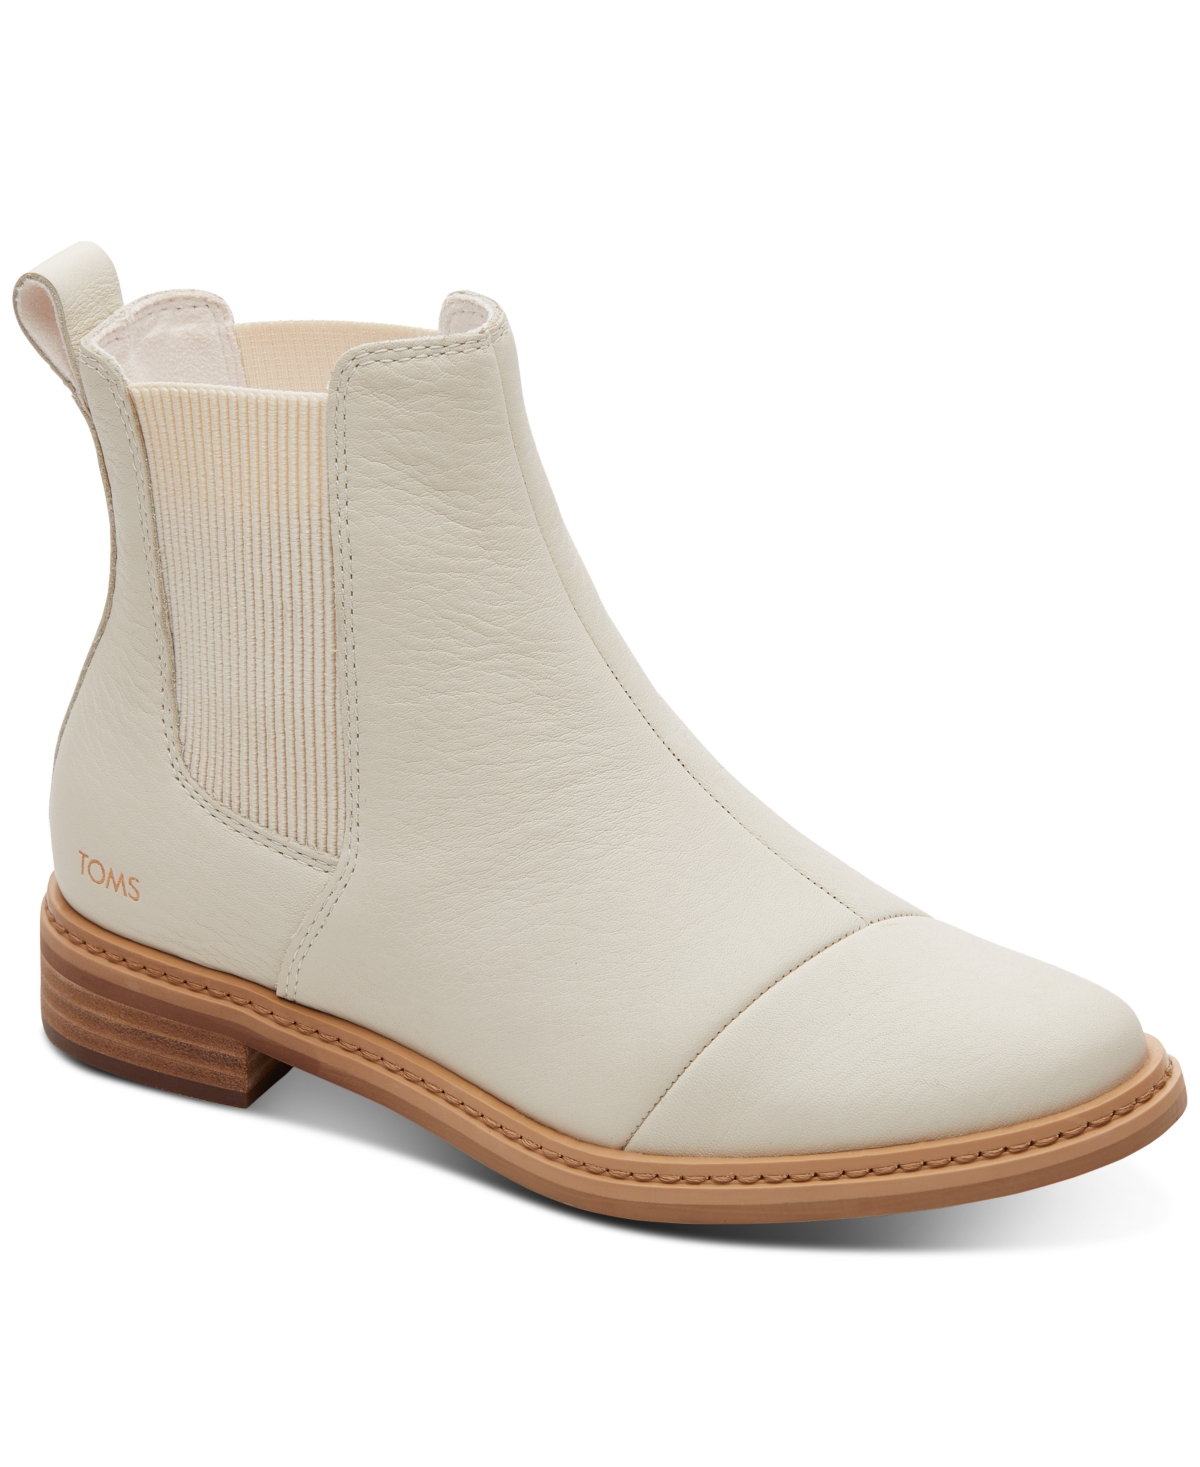 Women's Charlie Pull On Chelsea Booties - Light Sand Leather